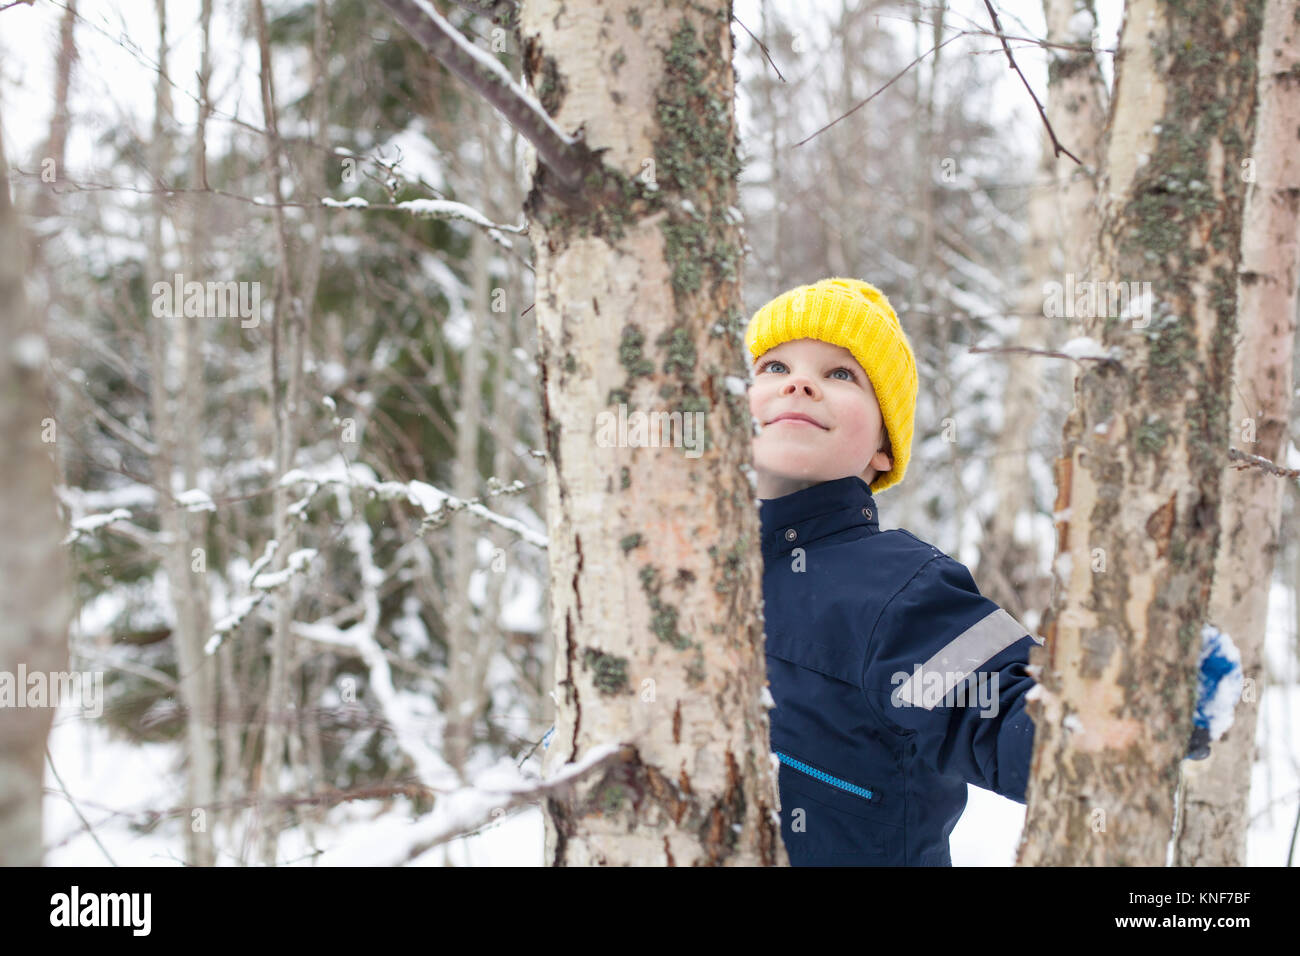 Boy in yellow knit hat looking up at tree in snow covered forest Stock Photo